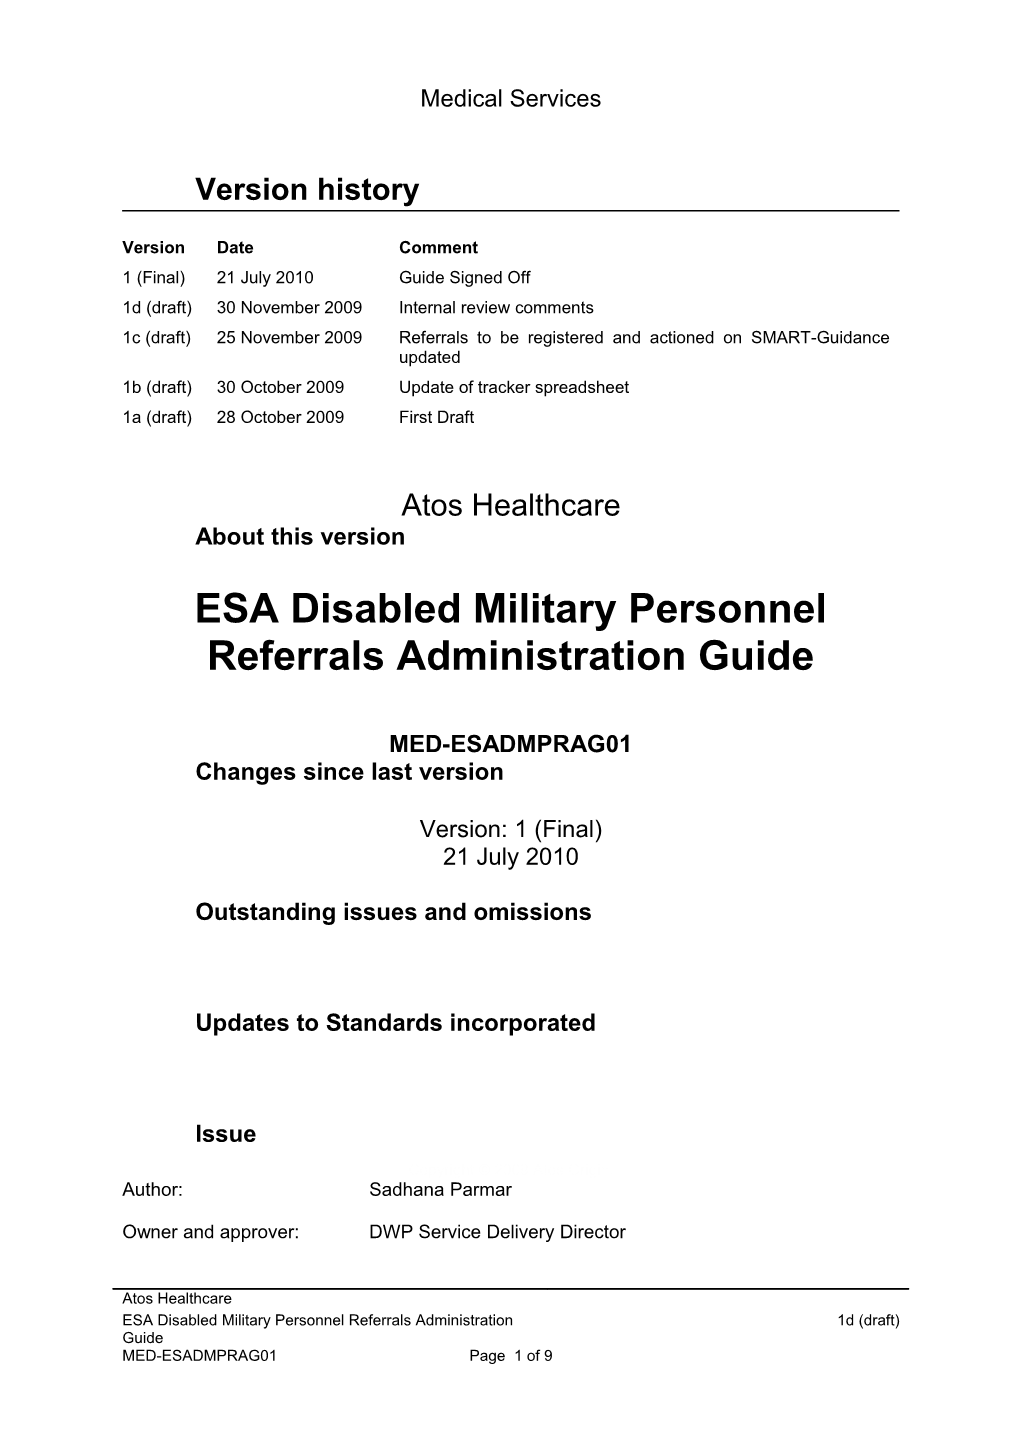 ESA Disabled Military Personnel Referrals Administration Guide